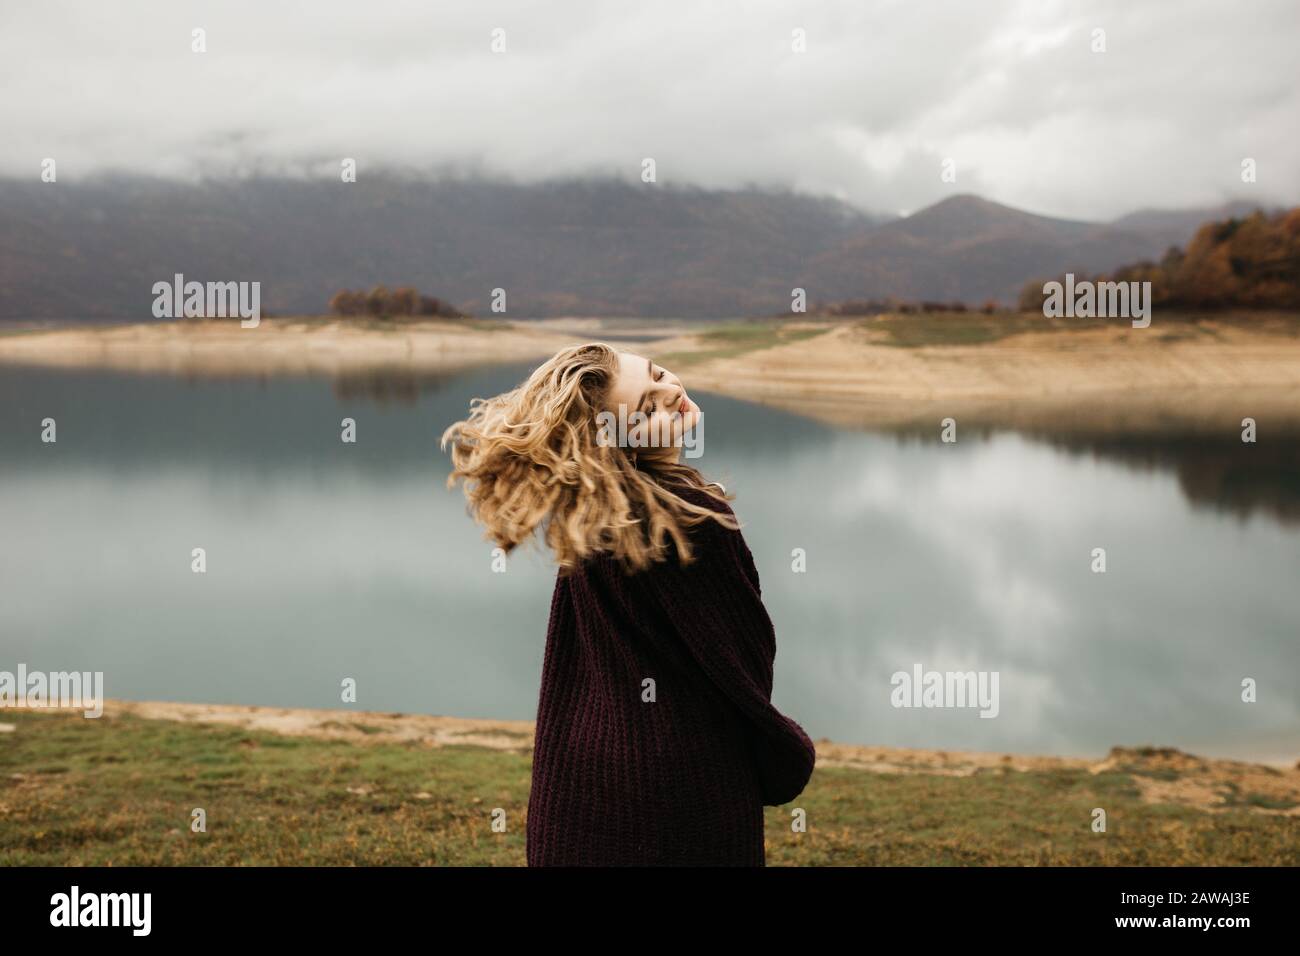 happy girl with curly blond hair dances on a lake alone, her hair is flying because of the wind flow, free as a bird. photo of girl with curly hair st Stock Photo